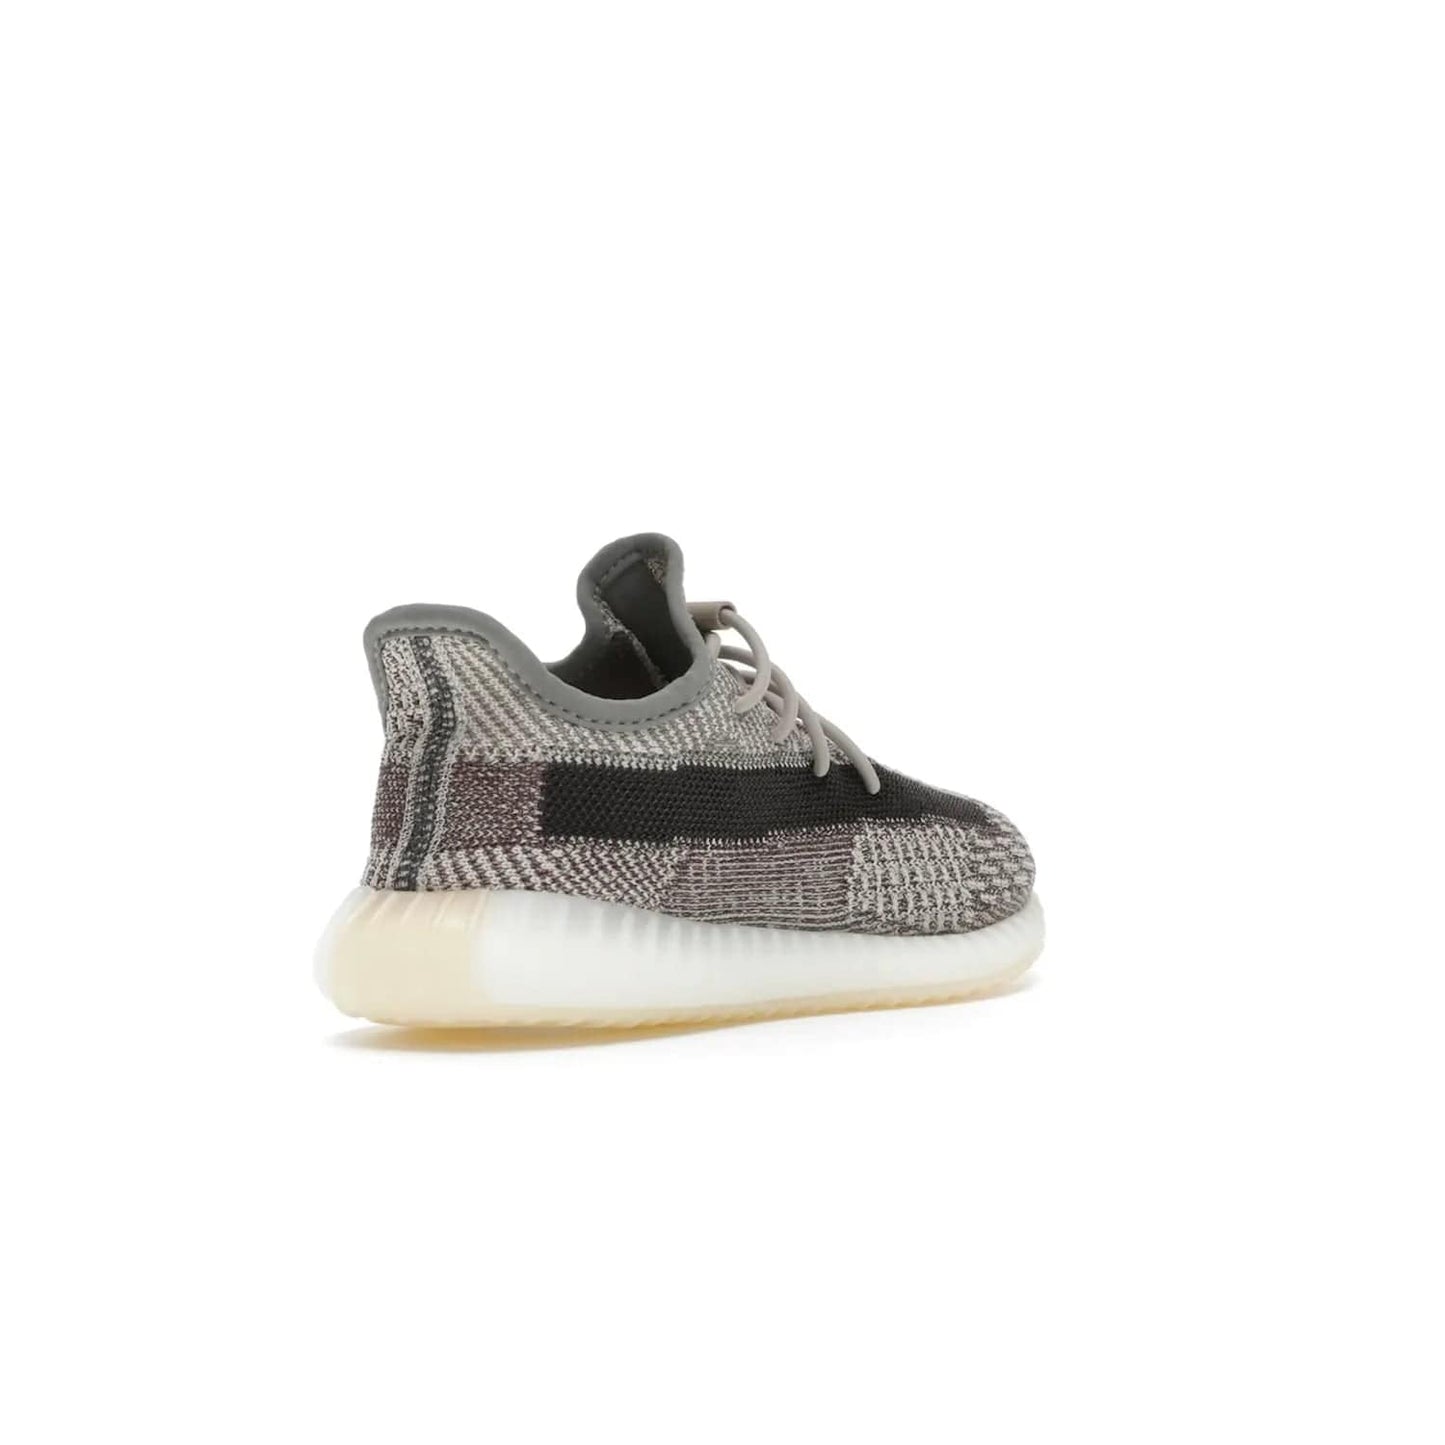 adidas Yeezy Boost 350 V2 Zyon (Kids) - Image 32 - Only at www.BallersClubKickz.com - The adidas Yeezy Boost 350 V2 Zyon (Kids) - perfect pick for fashion-savvy kids. Features soft Primeknit upper, lace closure & colorful patterning. Comfort & style for kids' summer outfits!